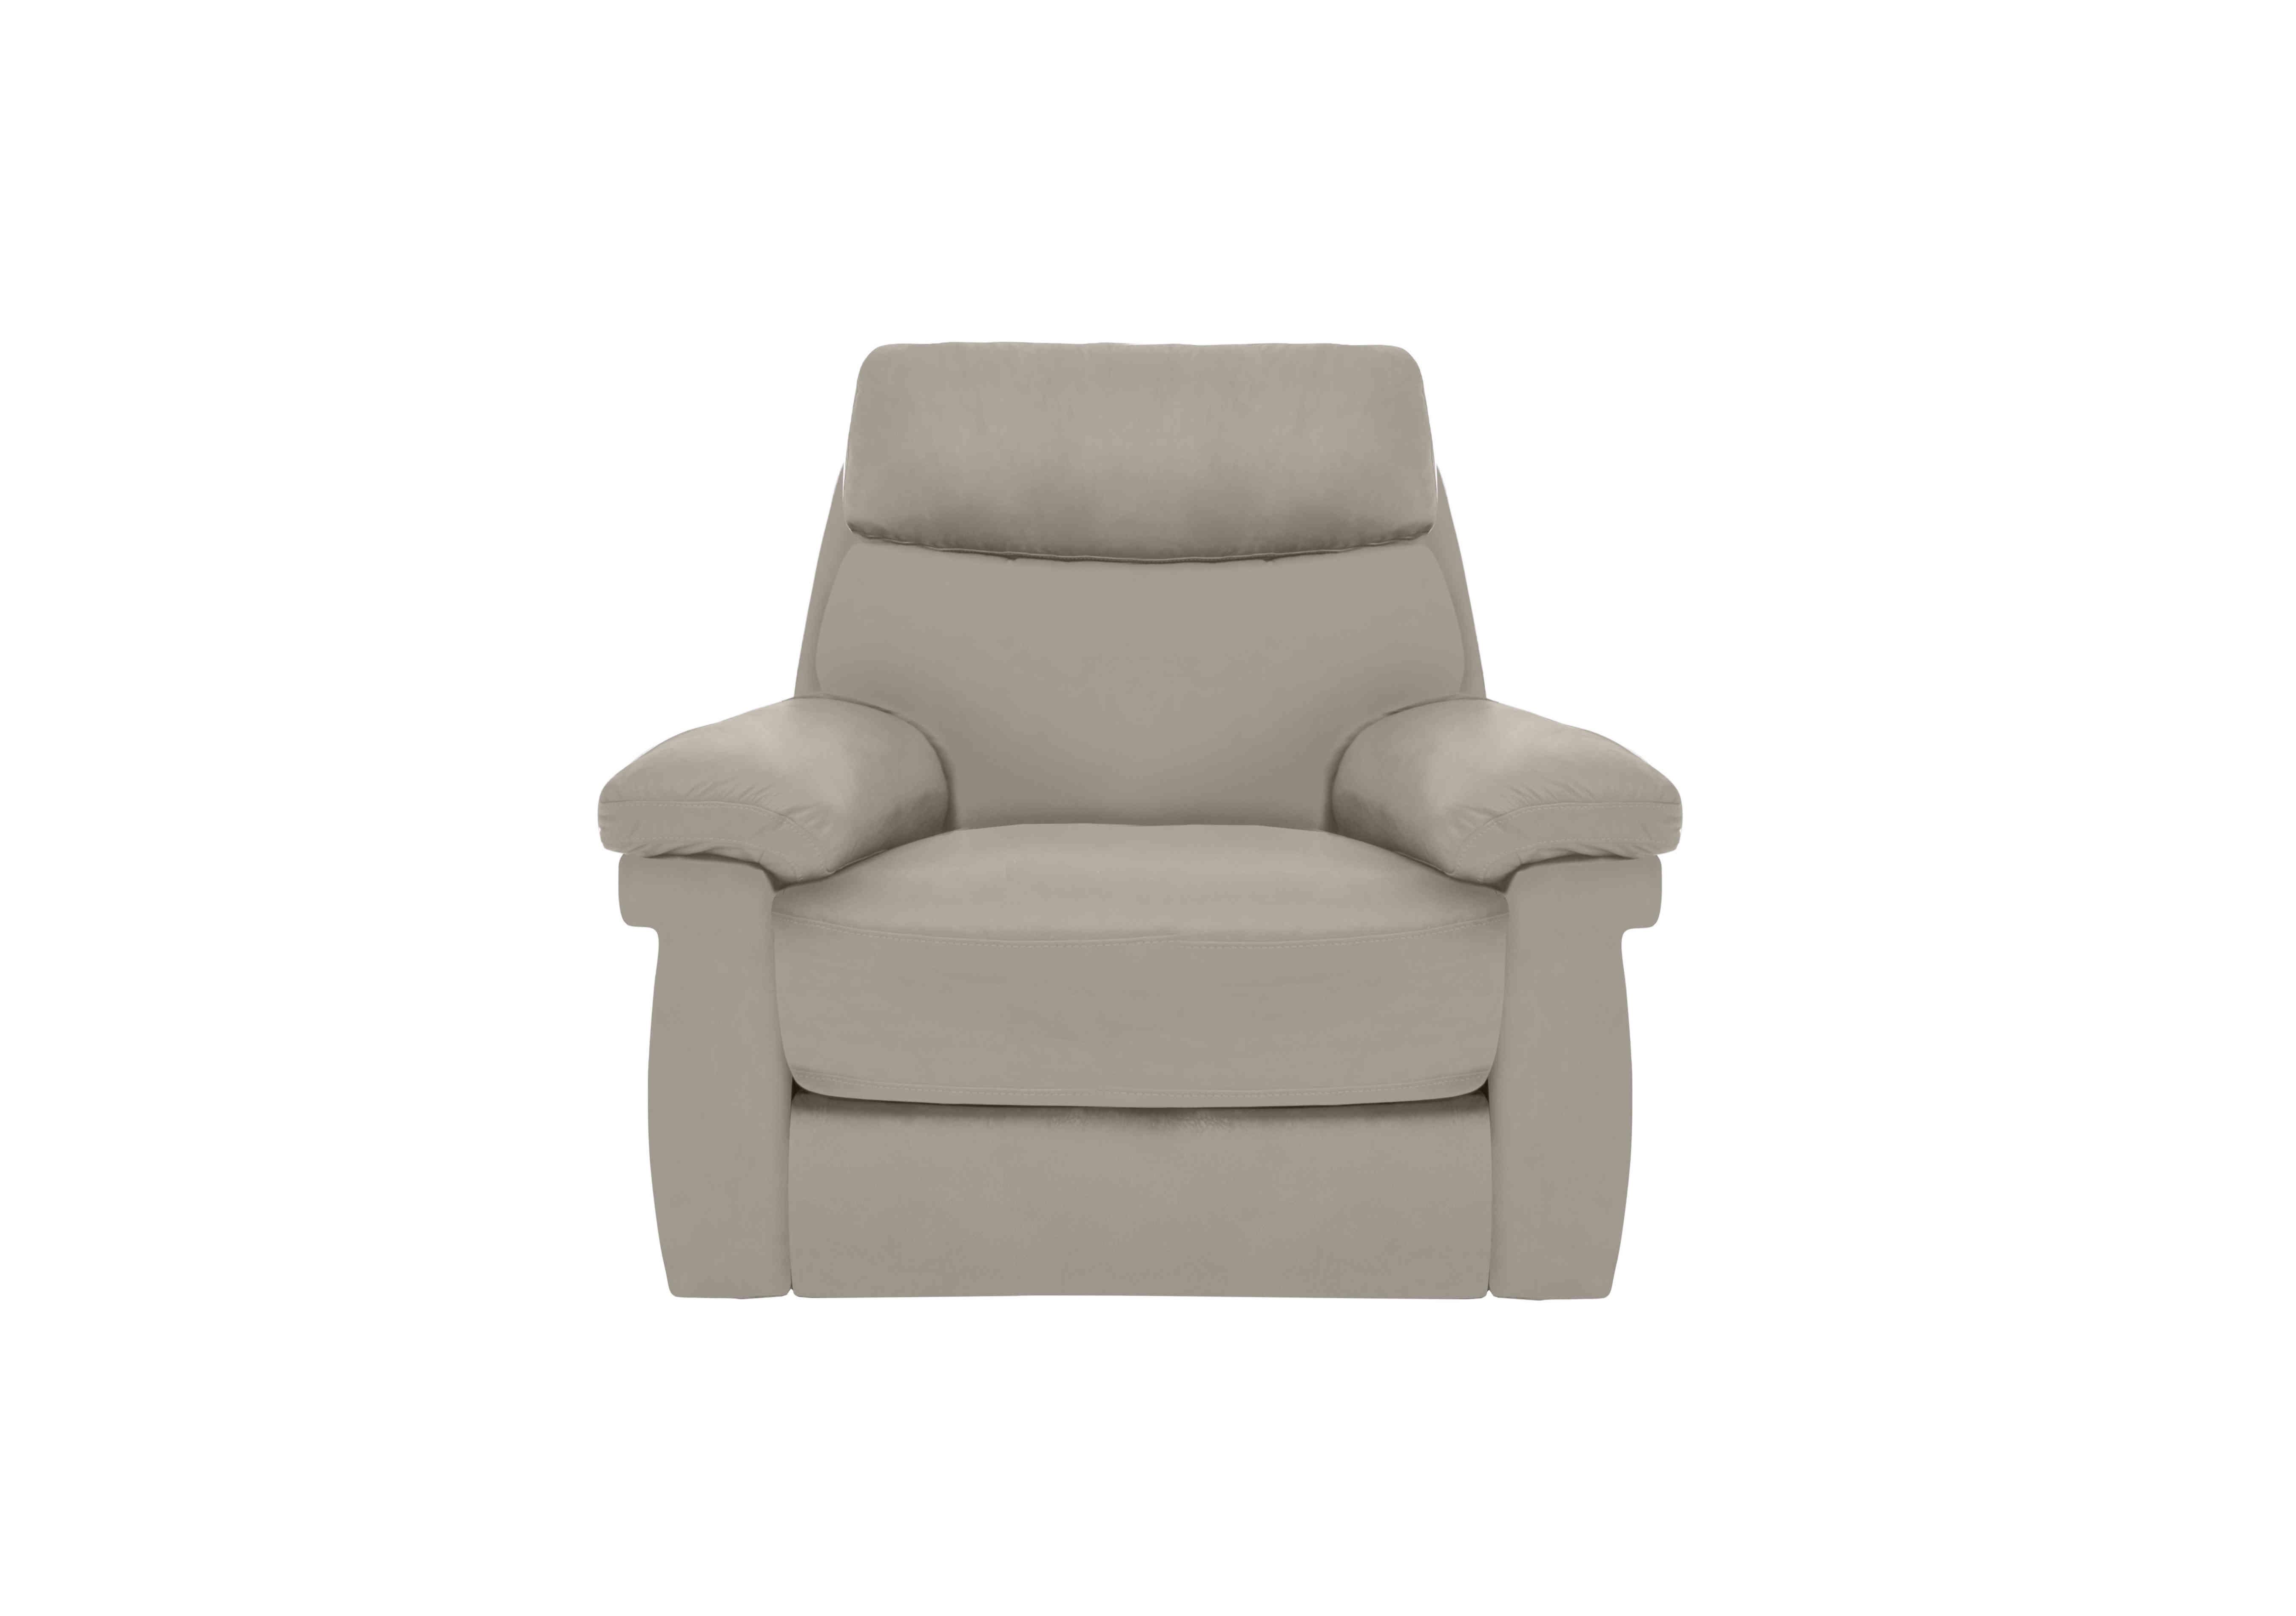 Serene Leather Power Recliner Chair with Power Headrest and Power Lumbar in Bx-251e Grey on Furniture Village